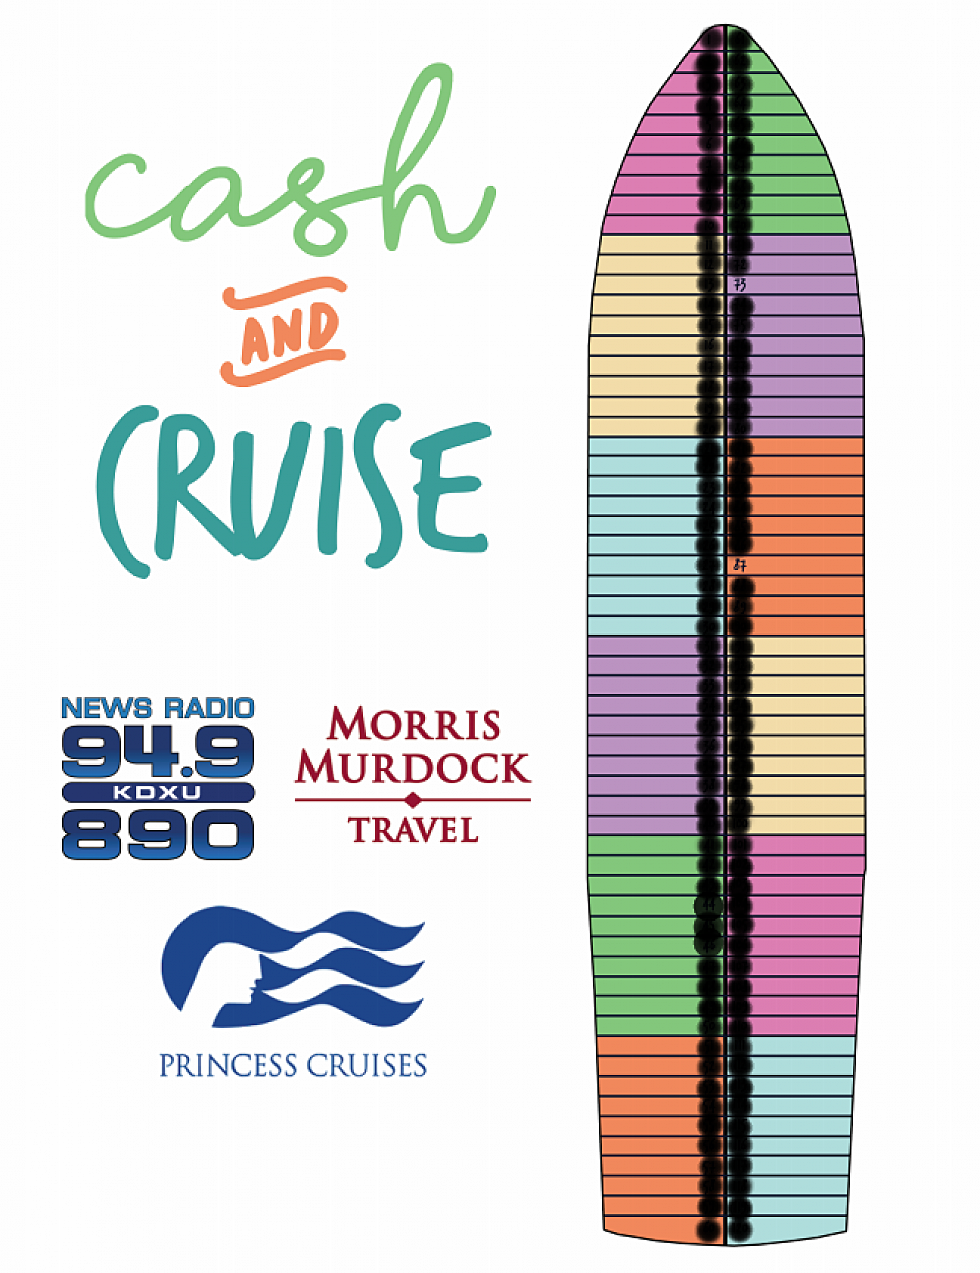 Friday is last day to qualify for cruise giveaway